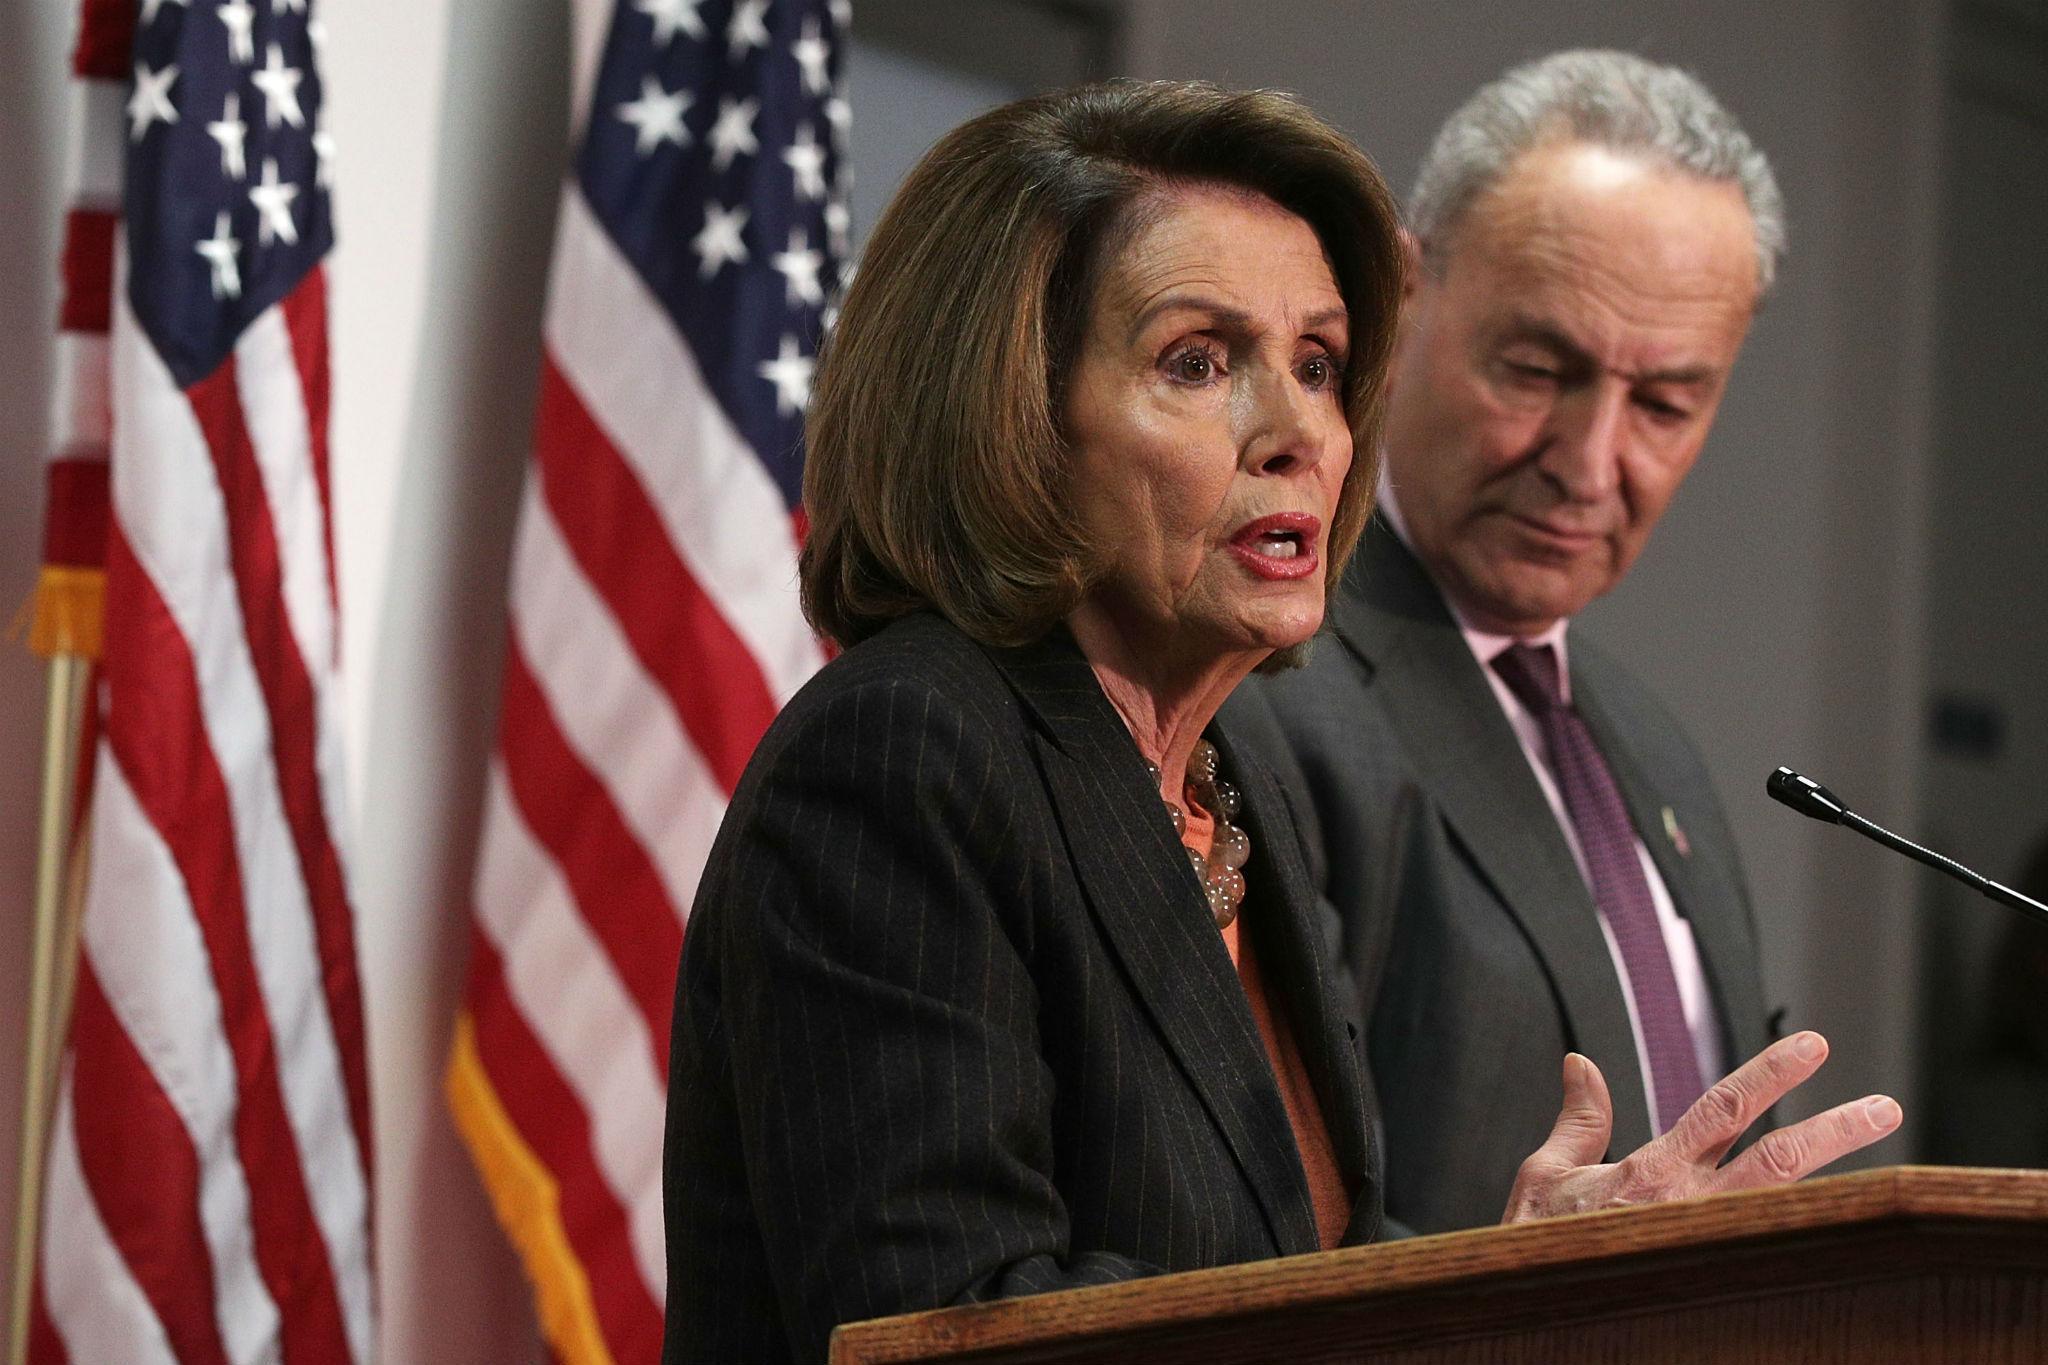 Senate Minority Leader Sen. Chuck Schumer and House Minority Leader Nancy Pelosi participate in a news conference (Photo by Alex Wong/Getty Images)